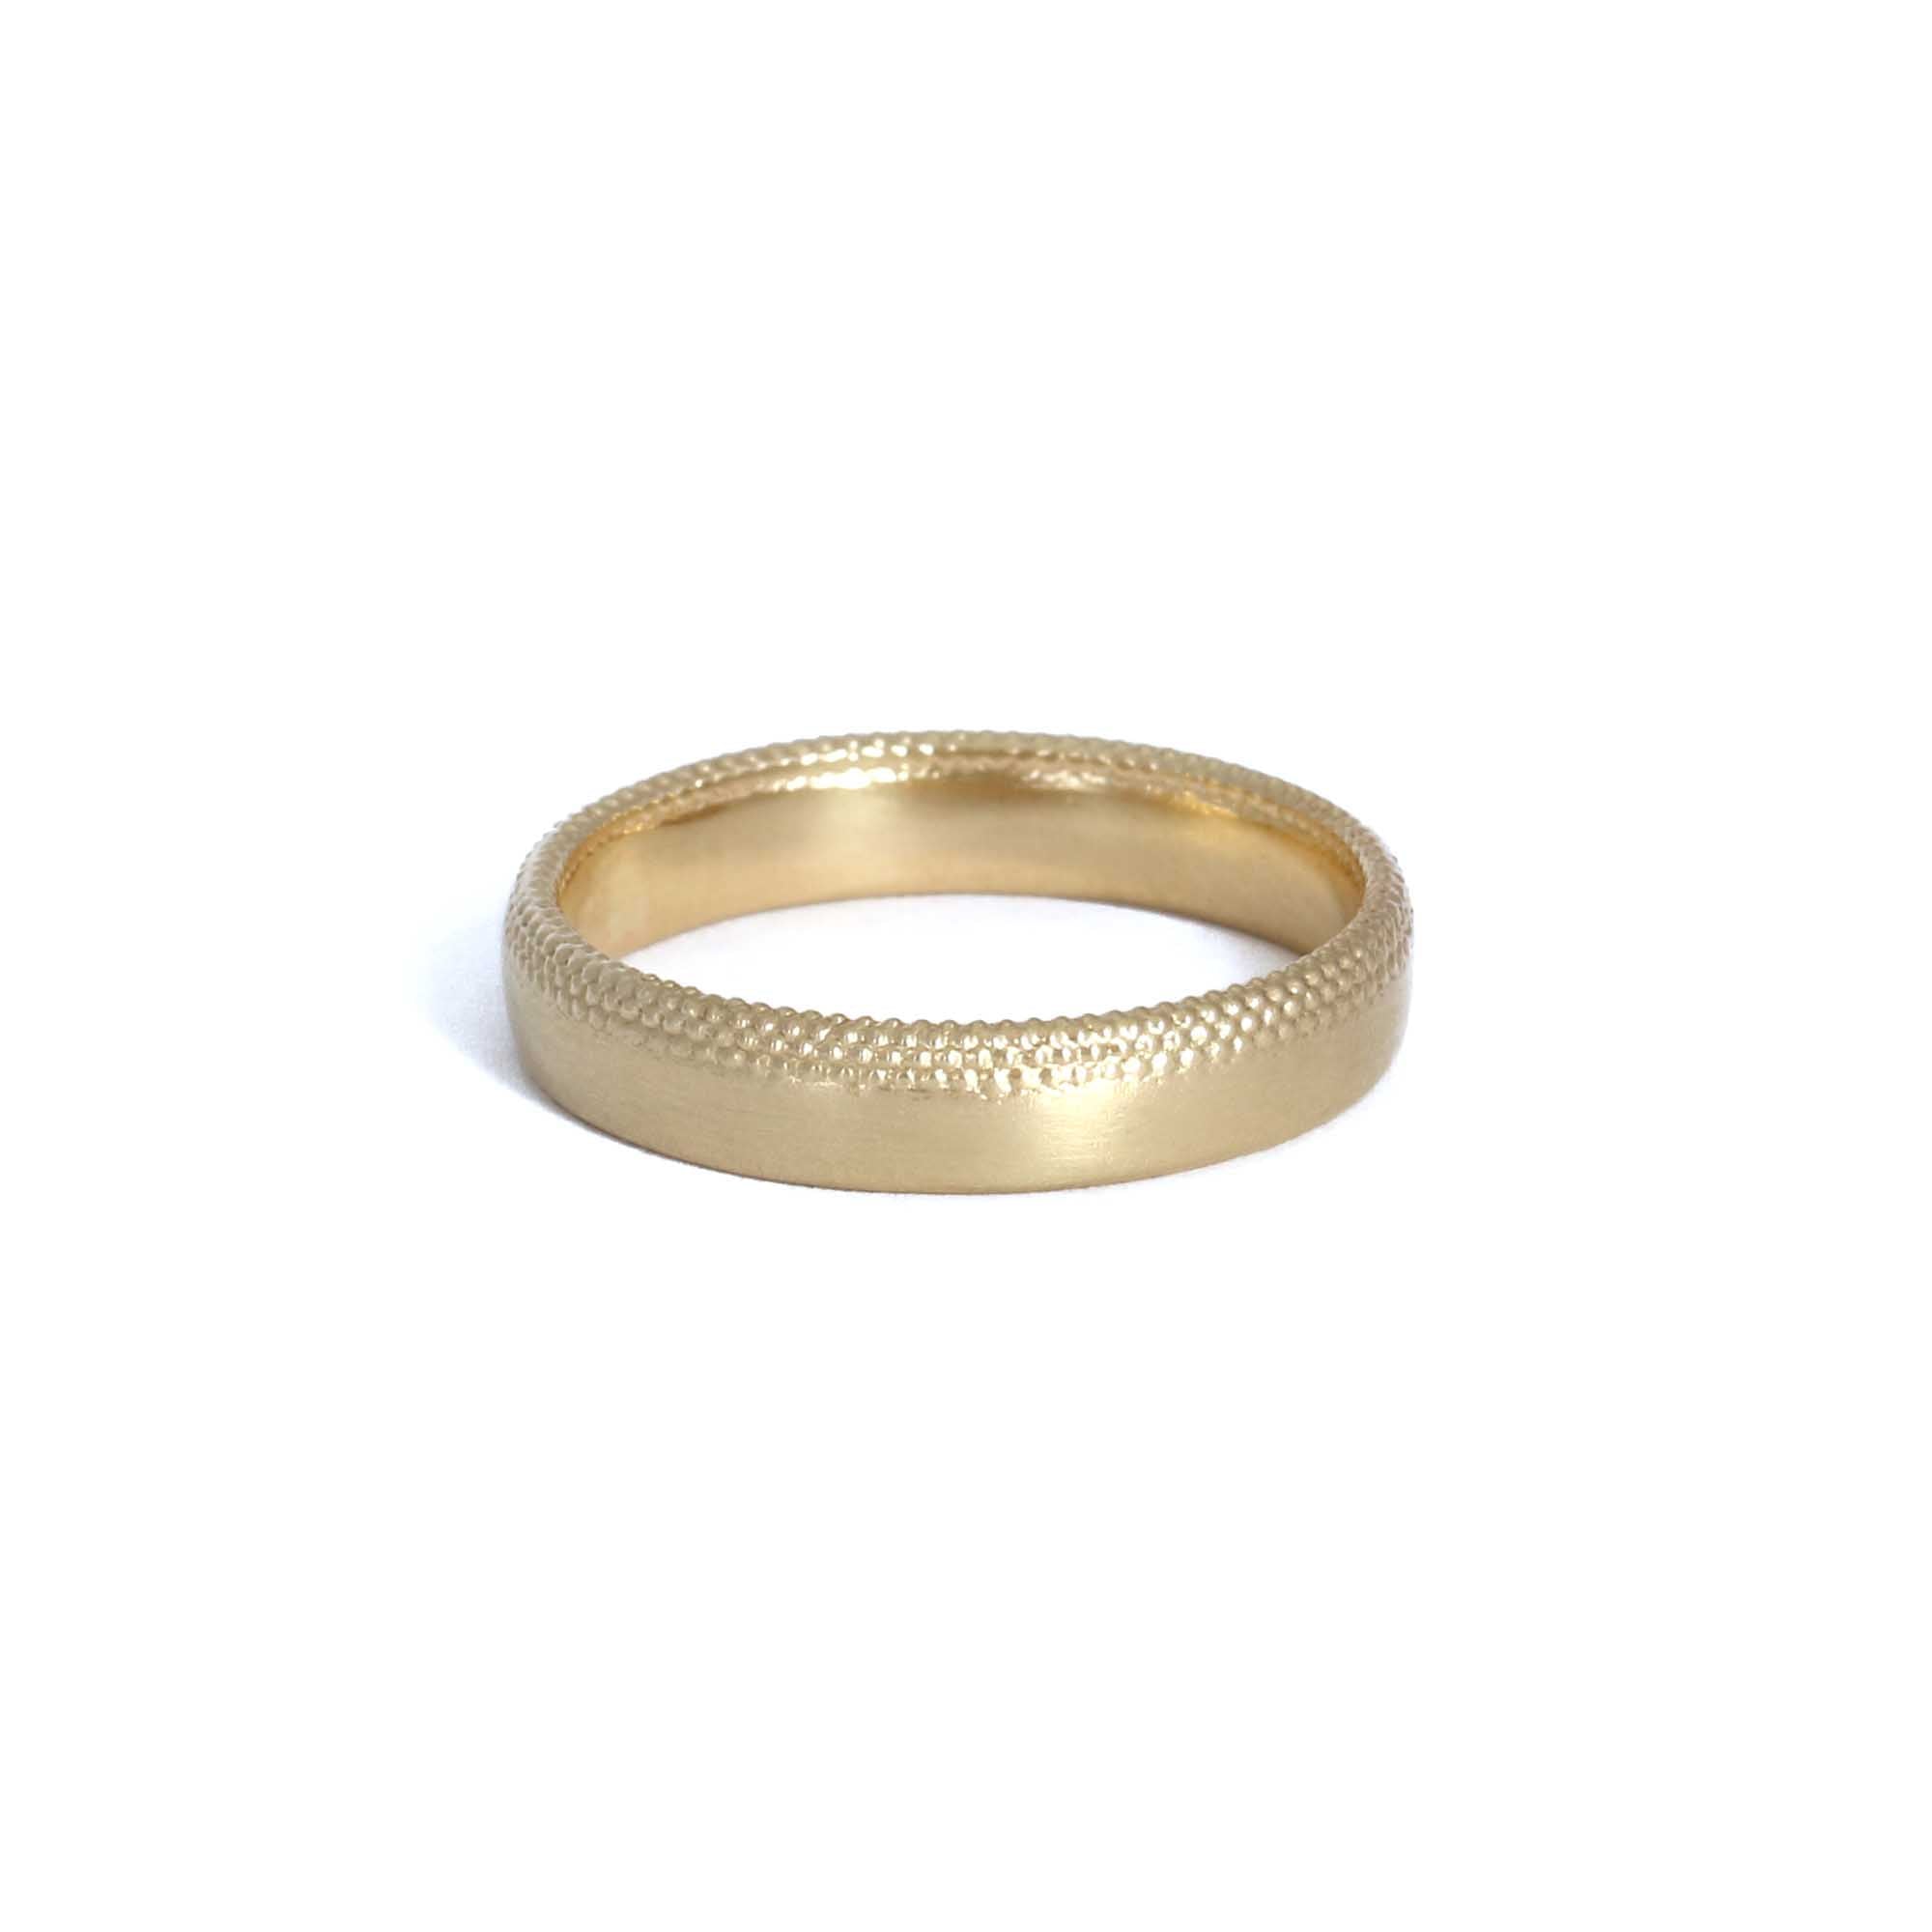 4.25mm Tyro Fade Band in 9ct yellow gold